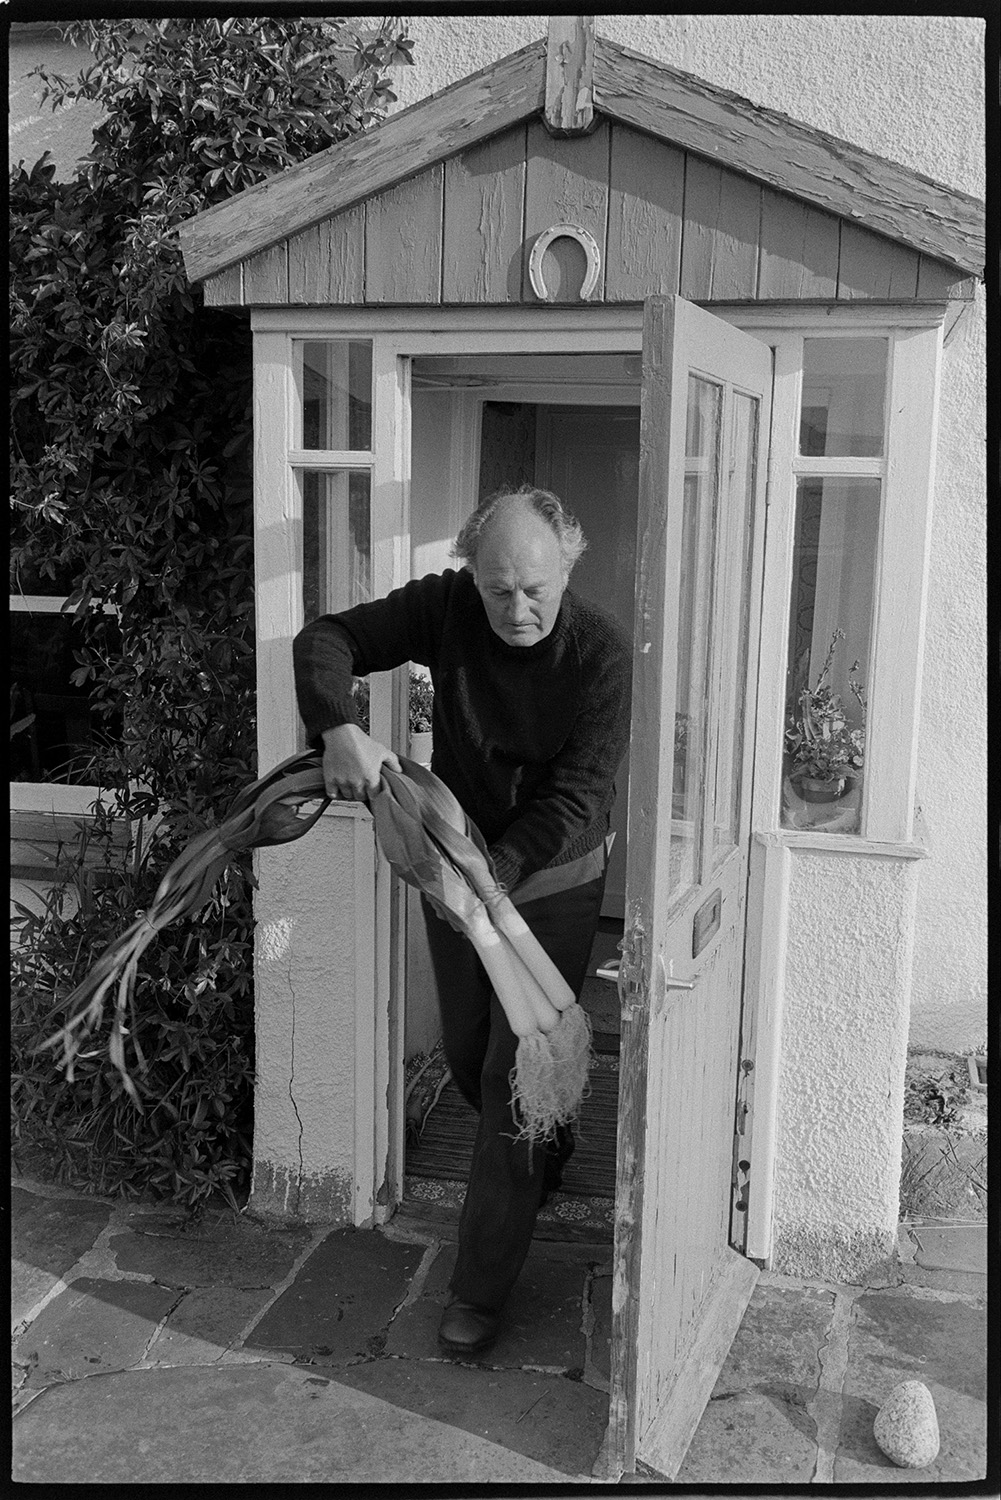 Preparing vegetables and flowers, flower show, boot of car with vegetables, chrysanthemums. 
[Michael Mitchell carrying leeks outs through the porch of Pear Tree Cottage, Aller Road, Dolton, to take to Dolton Flower Show. A horseshoe is hung above the porch door.]